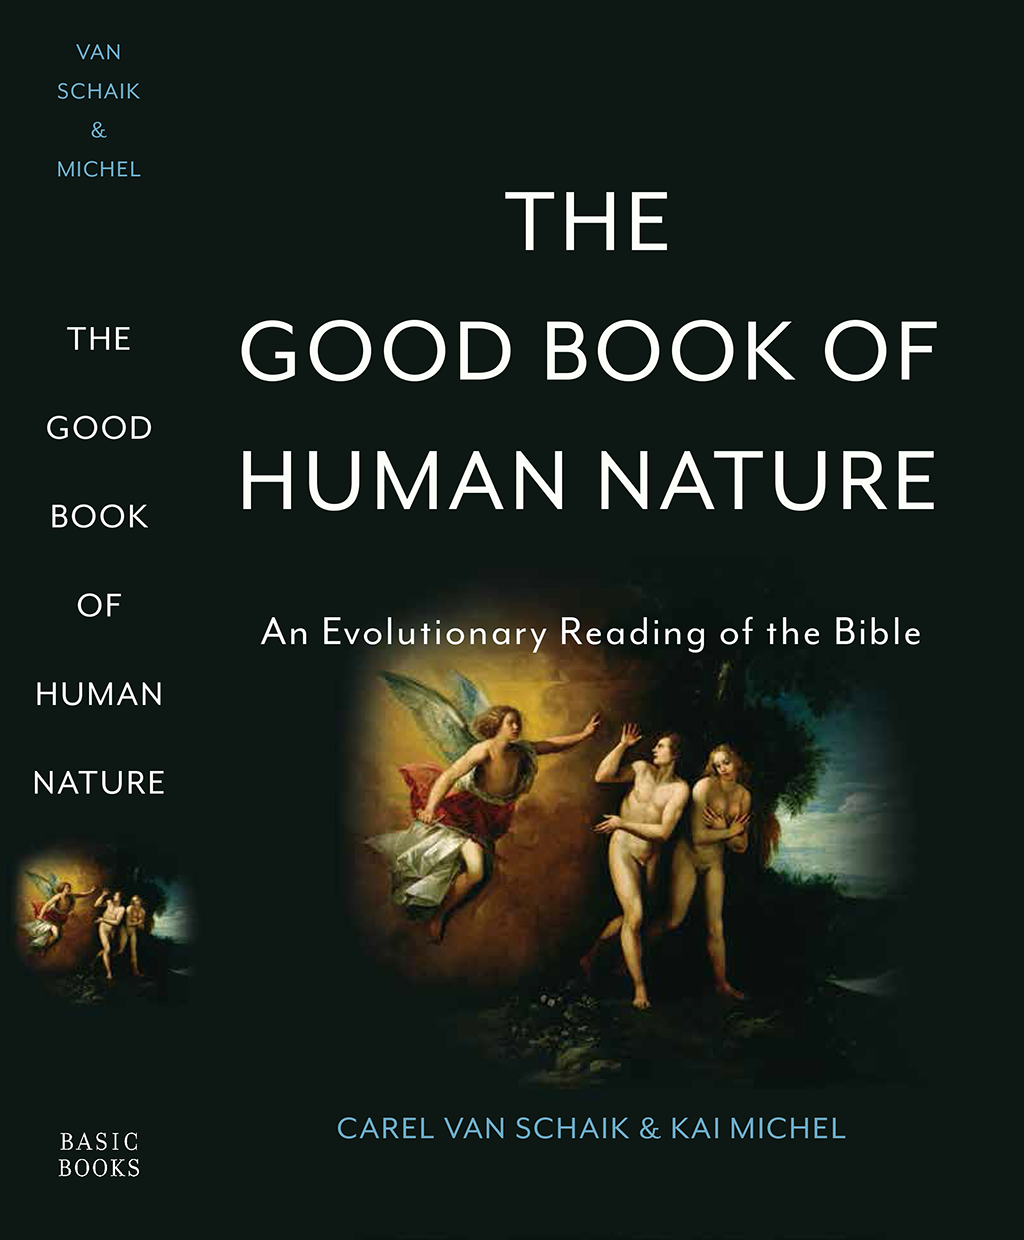 The Good Book of Human Nature